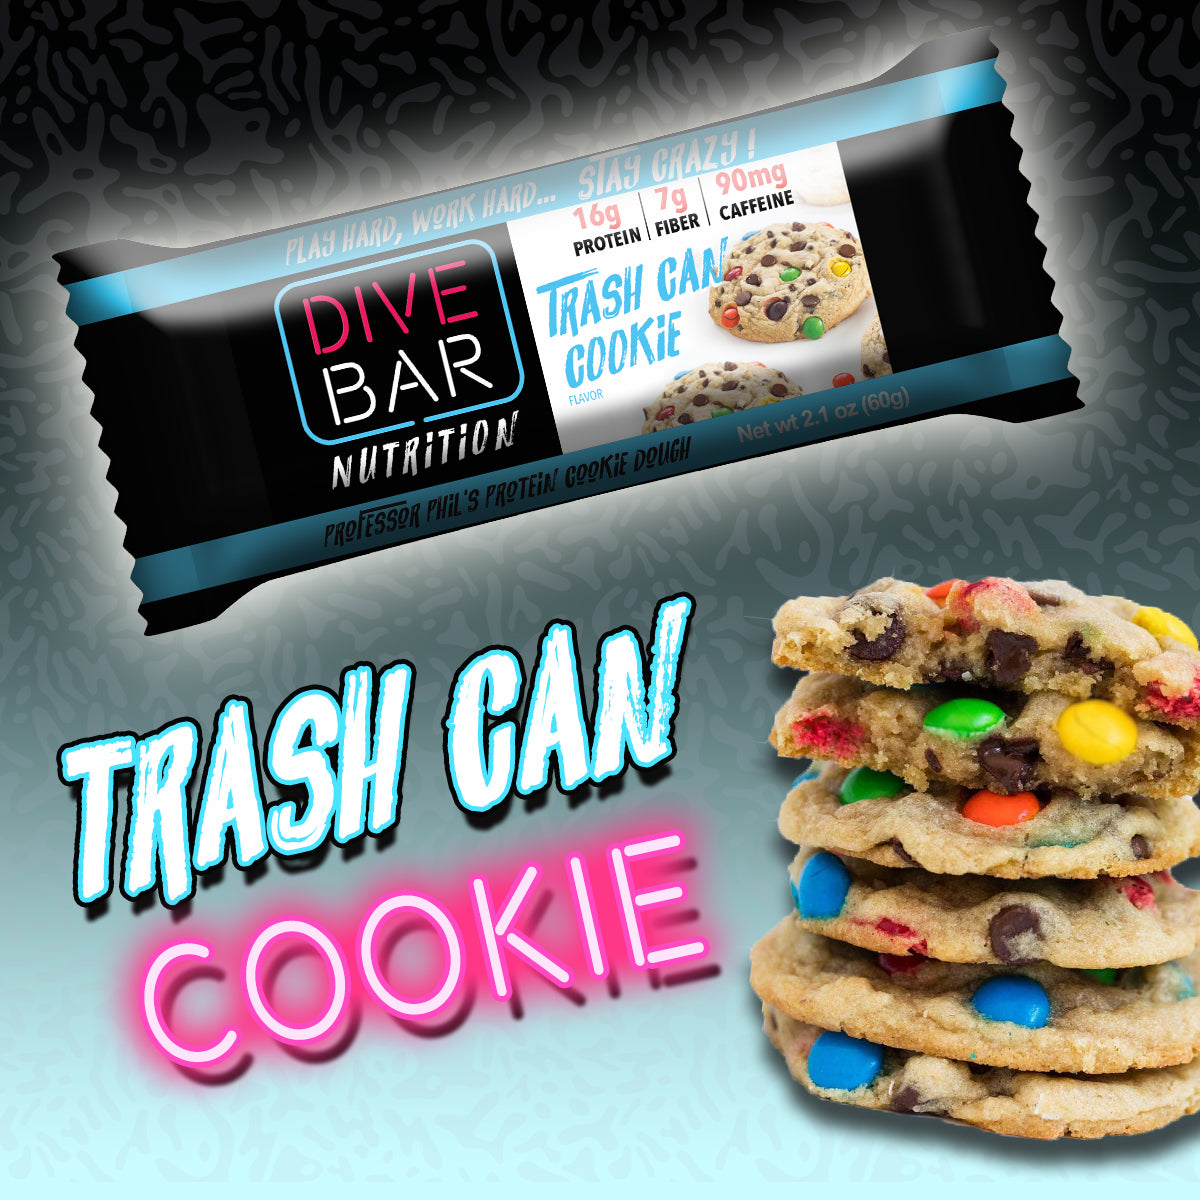 Trash Can Cookie - CLEARANCE 5 Bars